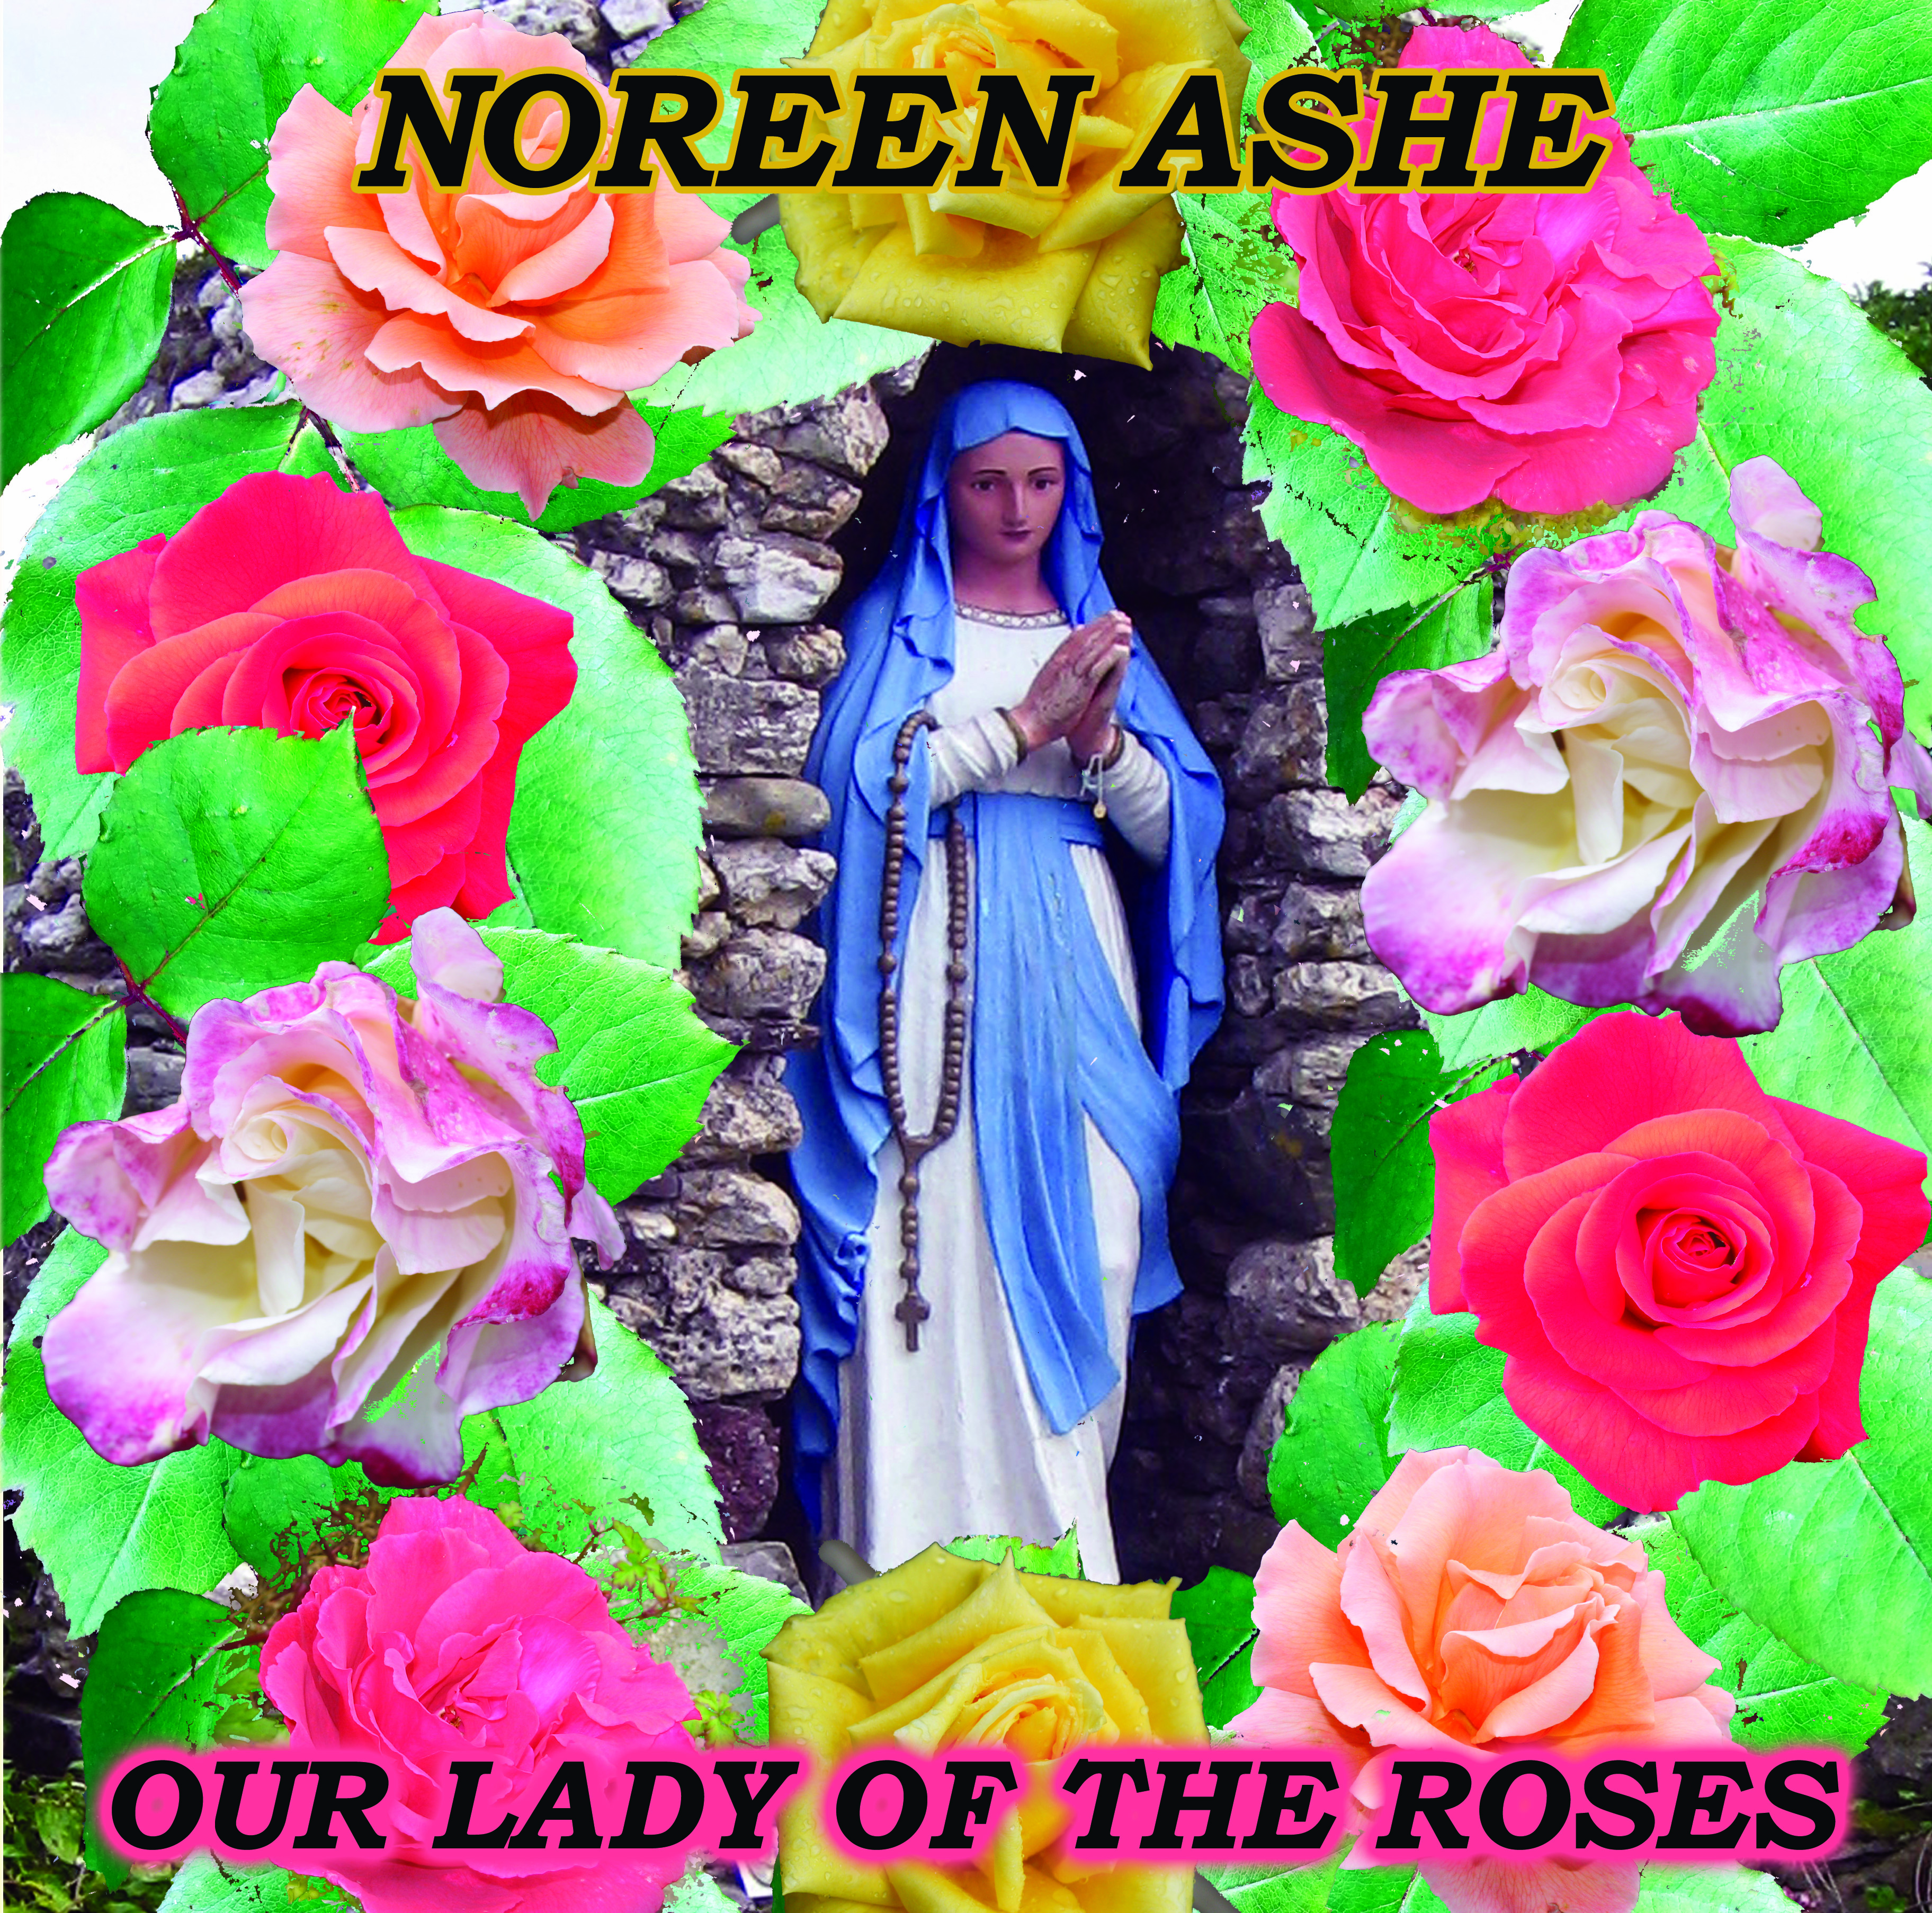 Our Lady of the Roses Album Cover